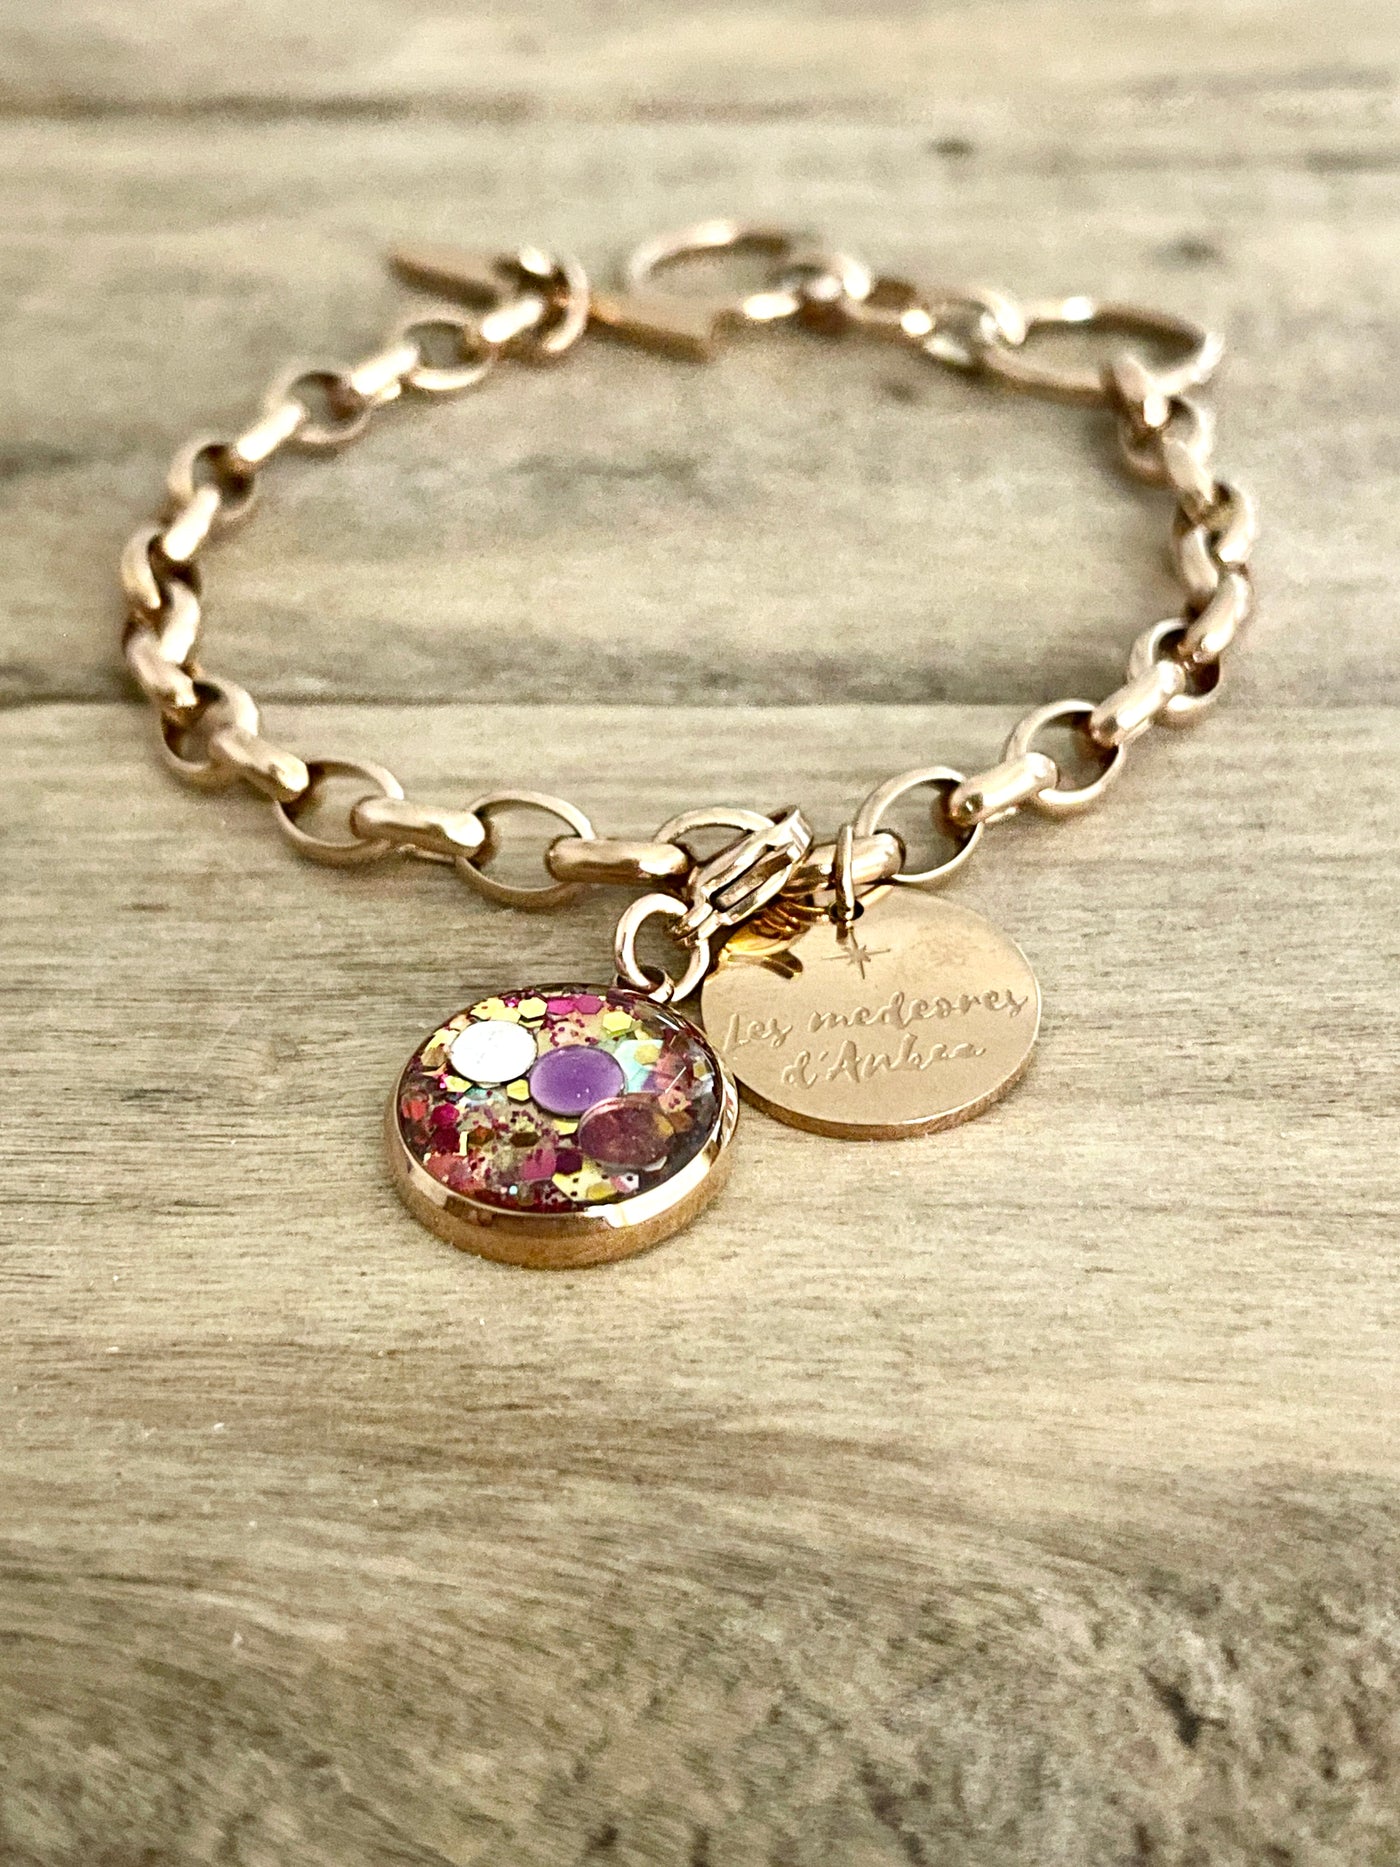 Medeore rose gold CONSCIOUSNESS charm (charm sold alone)